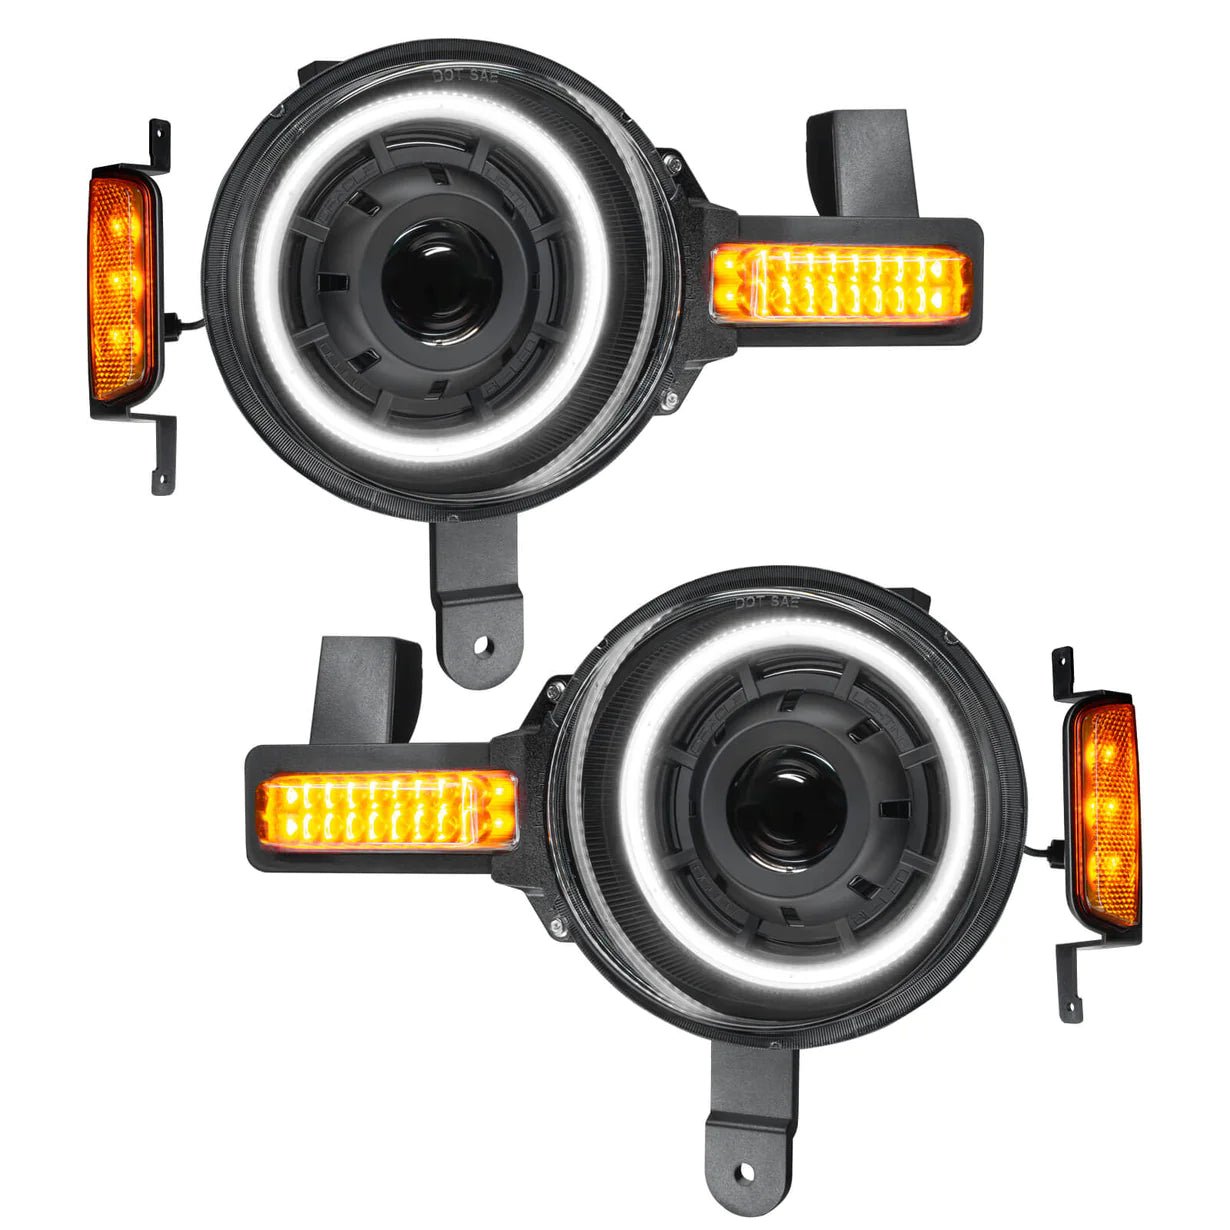 ORACLE LIGHTING OCULUS™ BI-LED PROJECTOR HEADLIGHTS FOR 2021+ FORD BRONCO - Offroad Outfitters